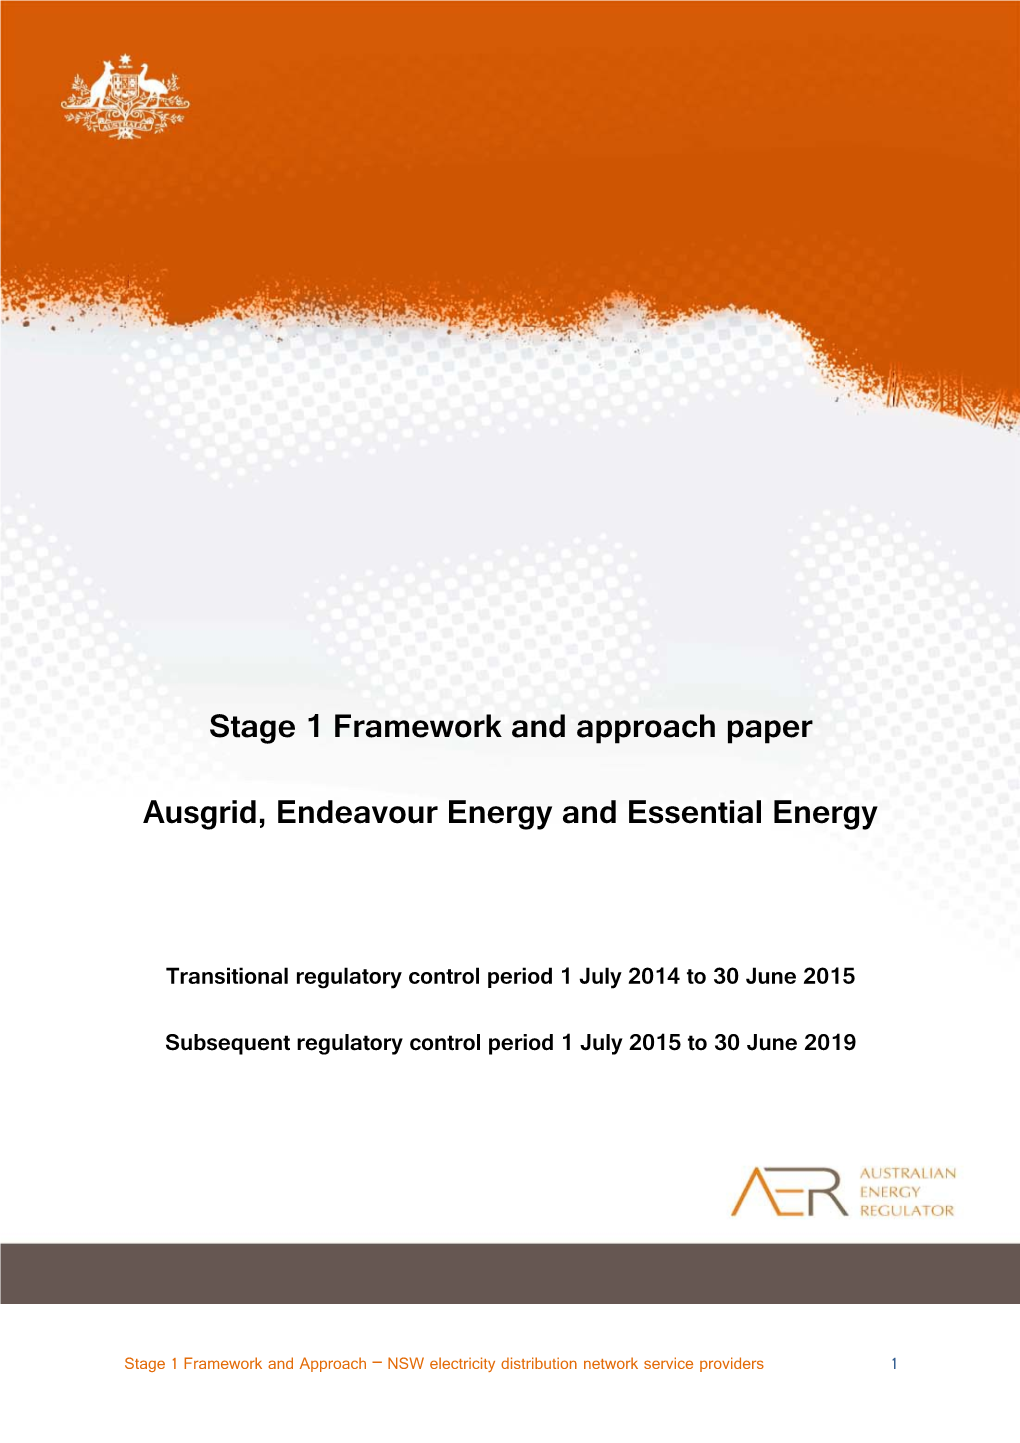 AER Stage 1 Framework and Approach - NSW Distributors - March 2013